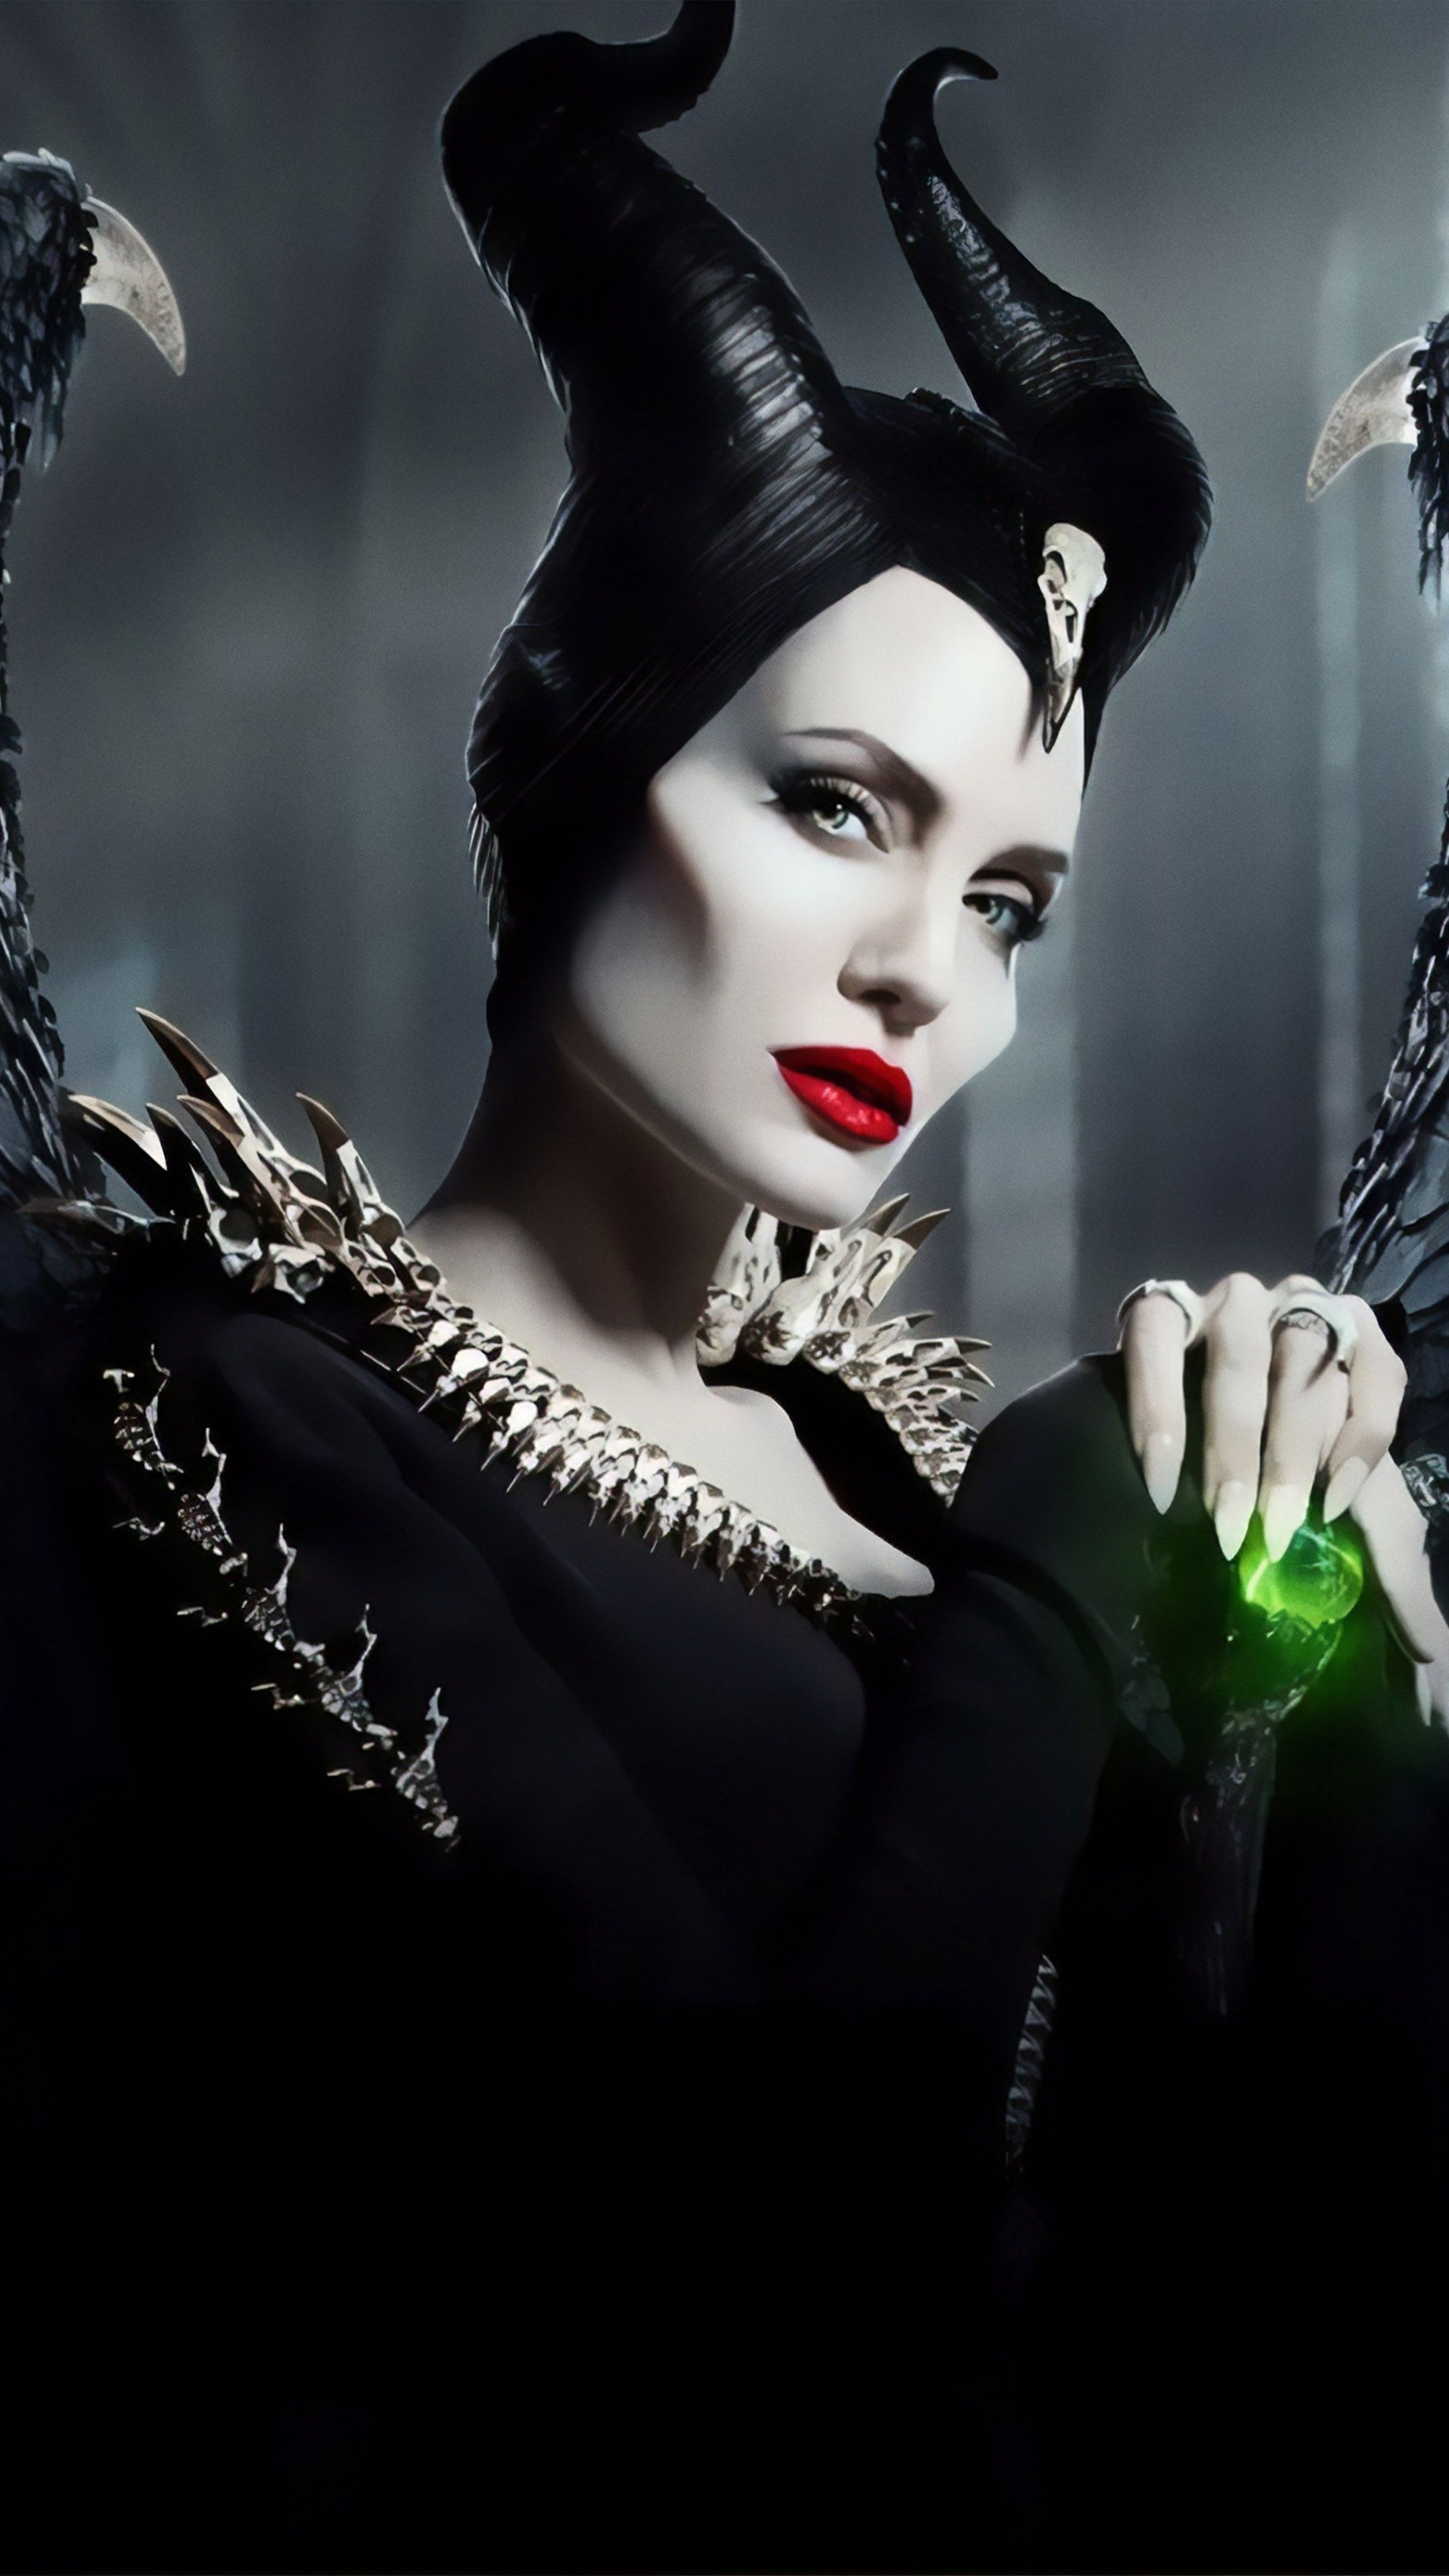 Maleficent 2 wallpapers, Enchanting sequel, Angelina Jolie, Fairy tale, 2160x3840 4K Phone